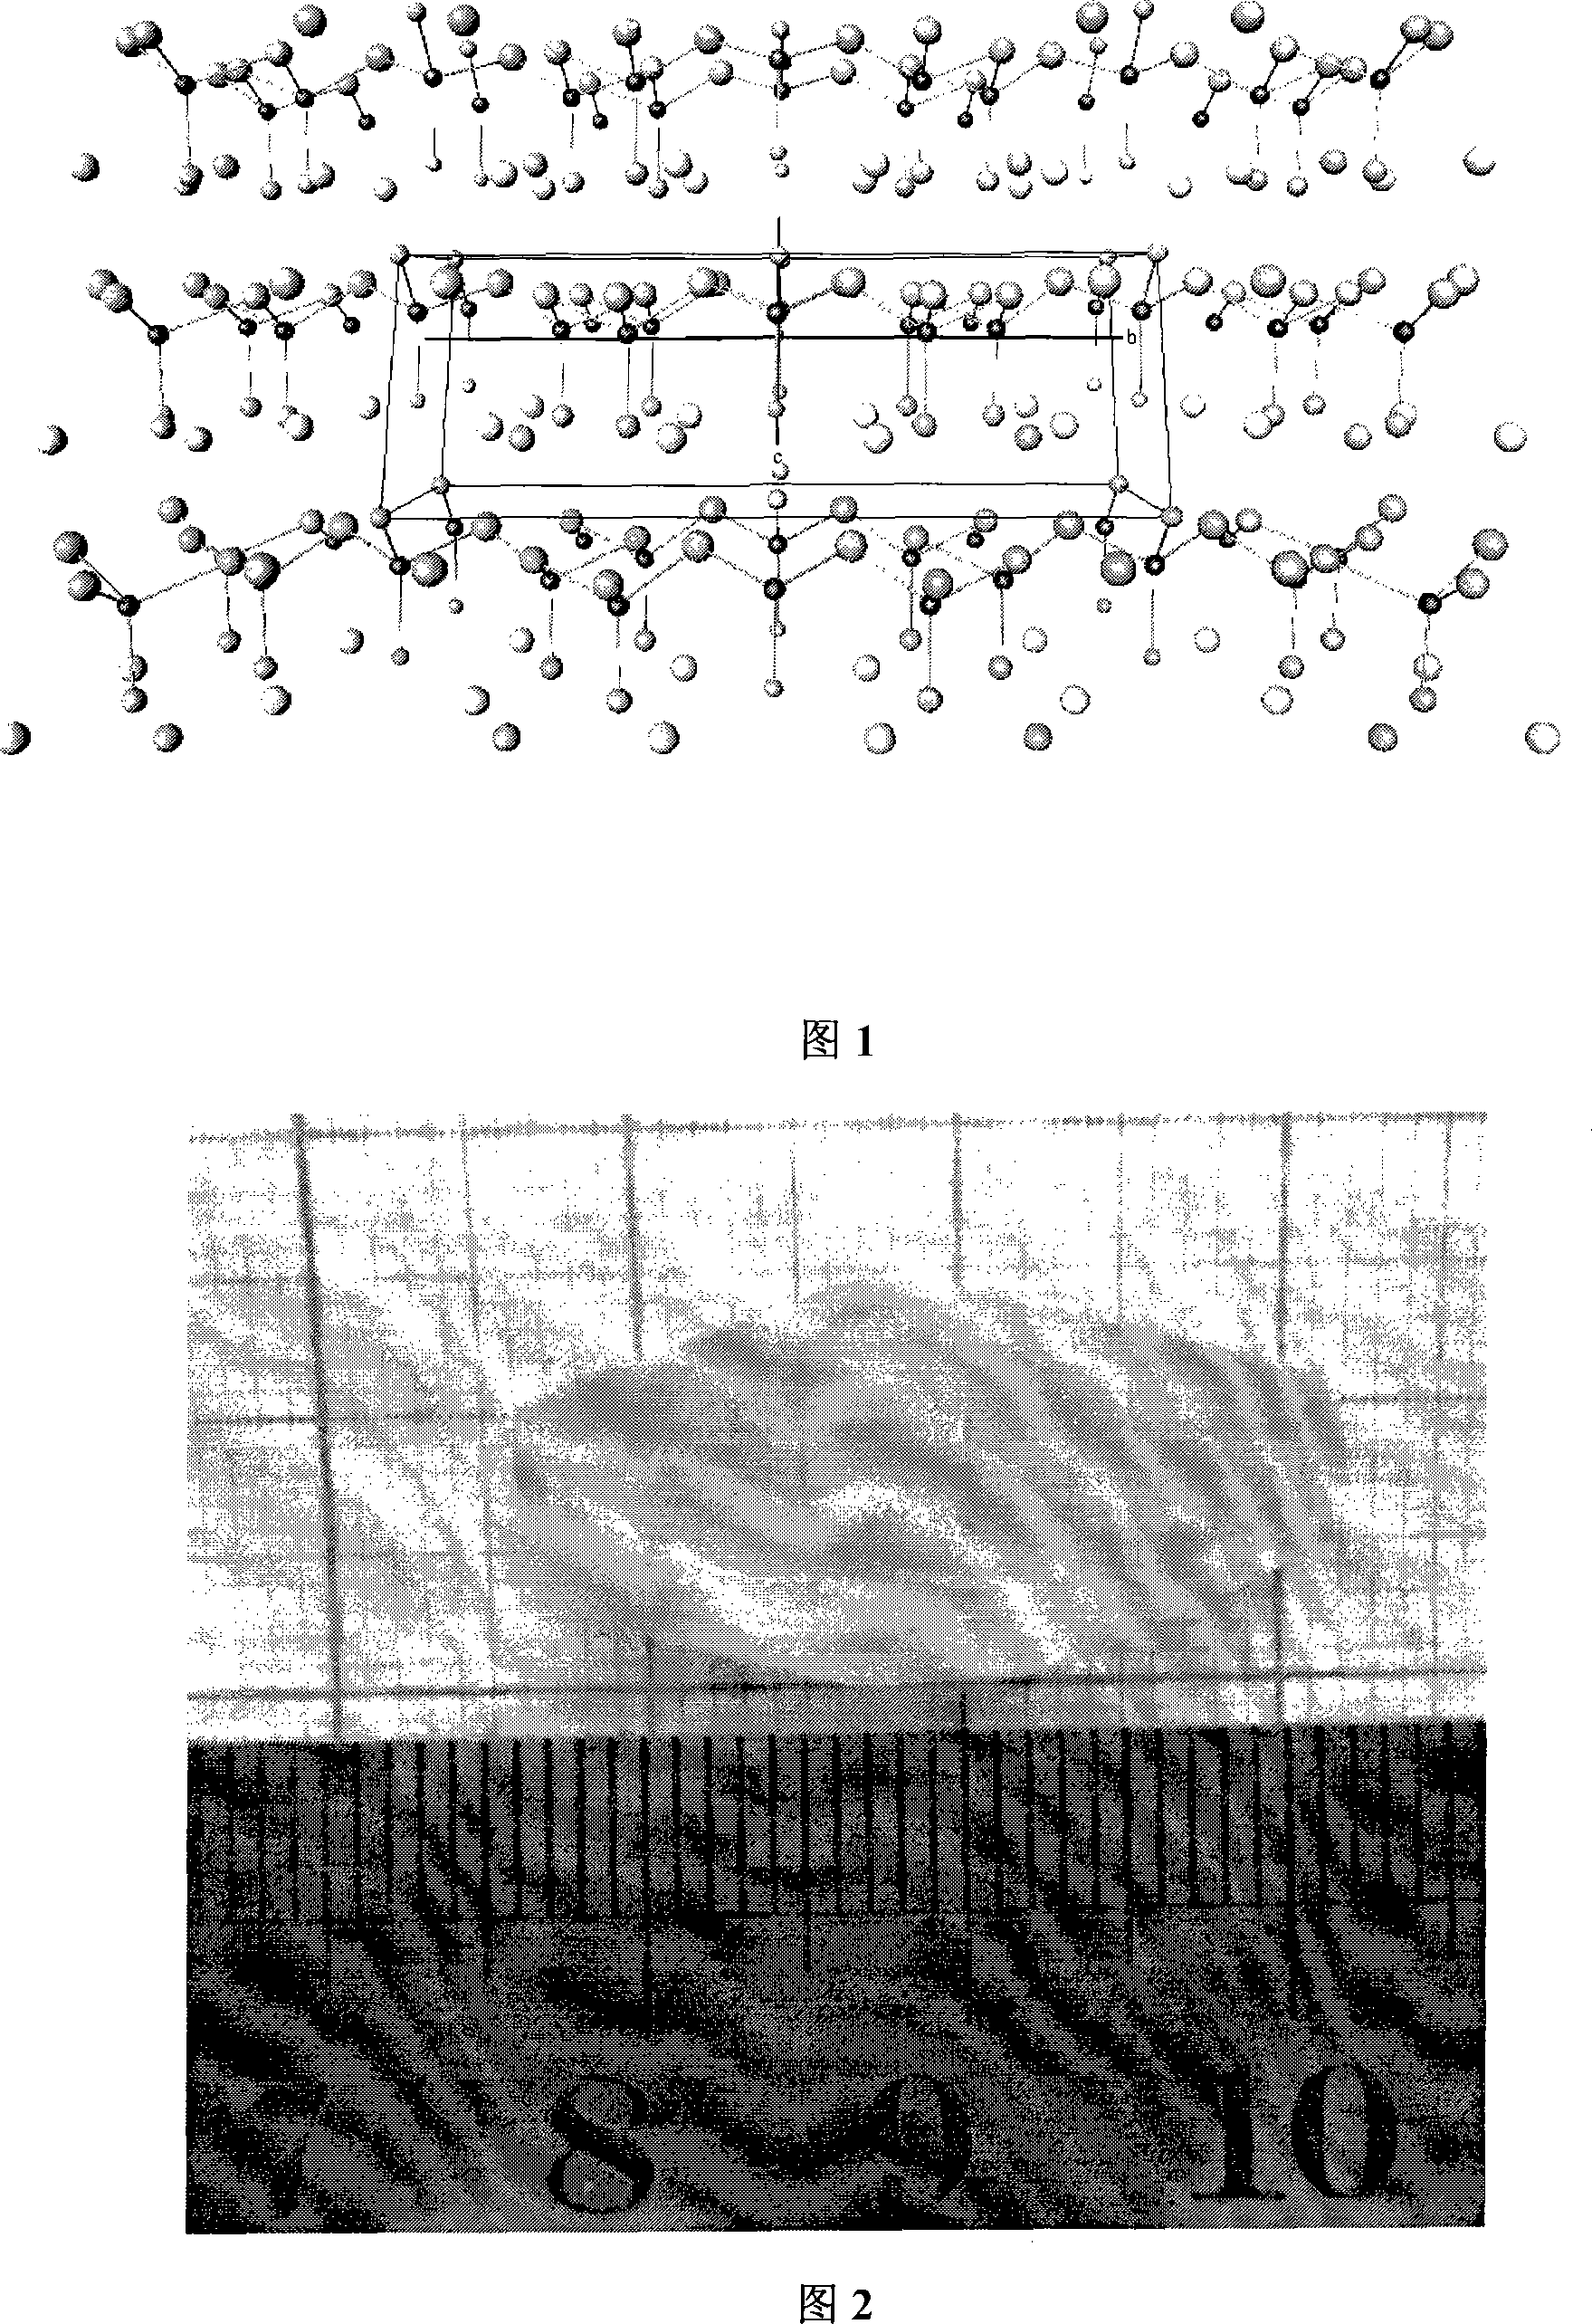 Inorganic infrared nonlinear optical crystal material and method for making same and uses